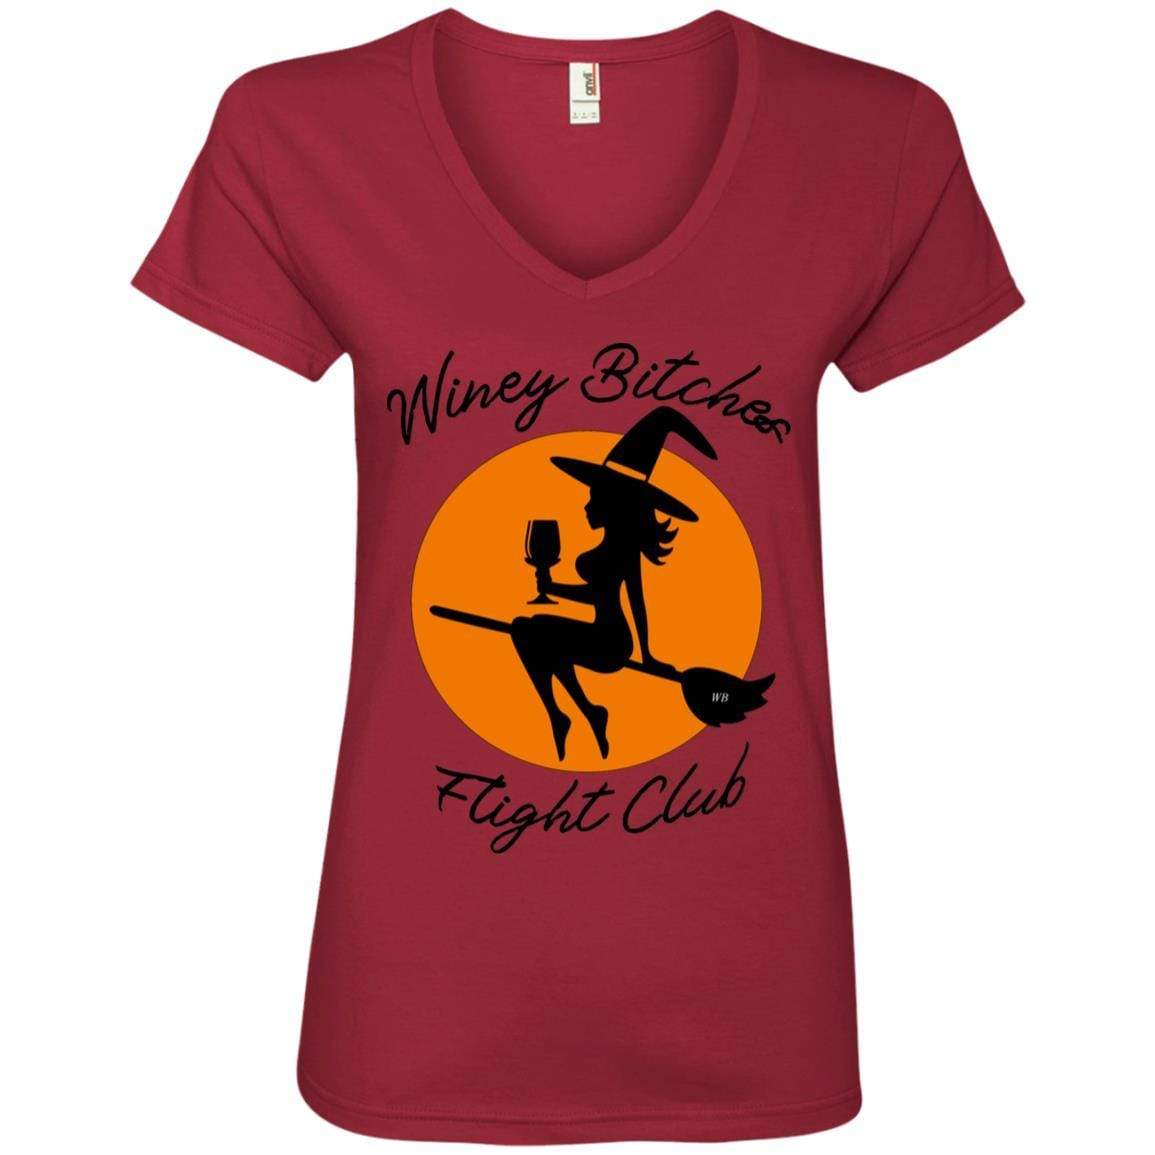 T-Shirts Independence Red / S WineyBitches.Co "Winey Bitches Flight Club" Ladies' V-Neck T-Shirt WineyBitchesCo